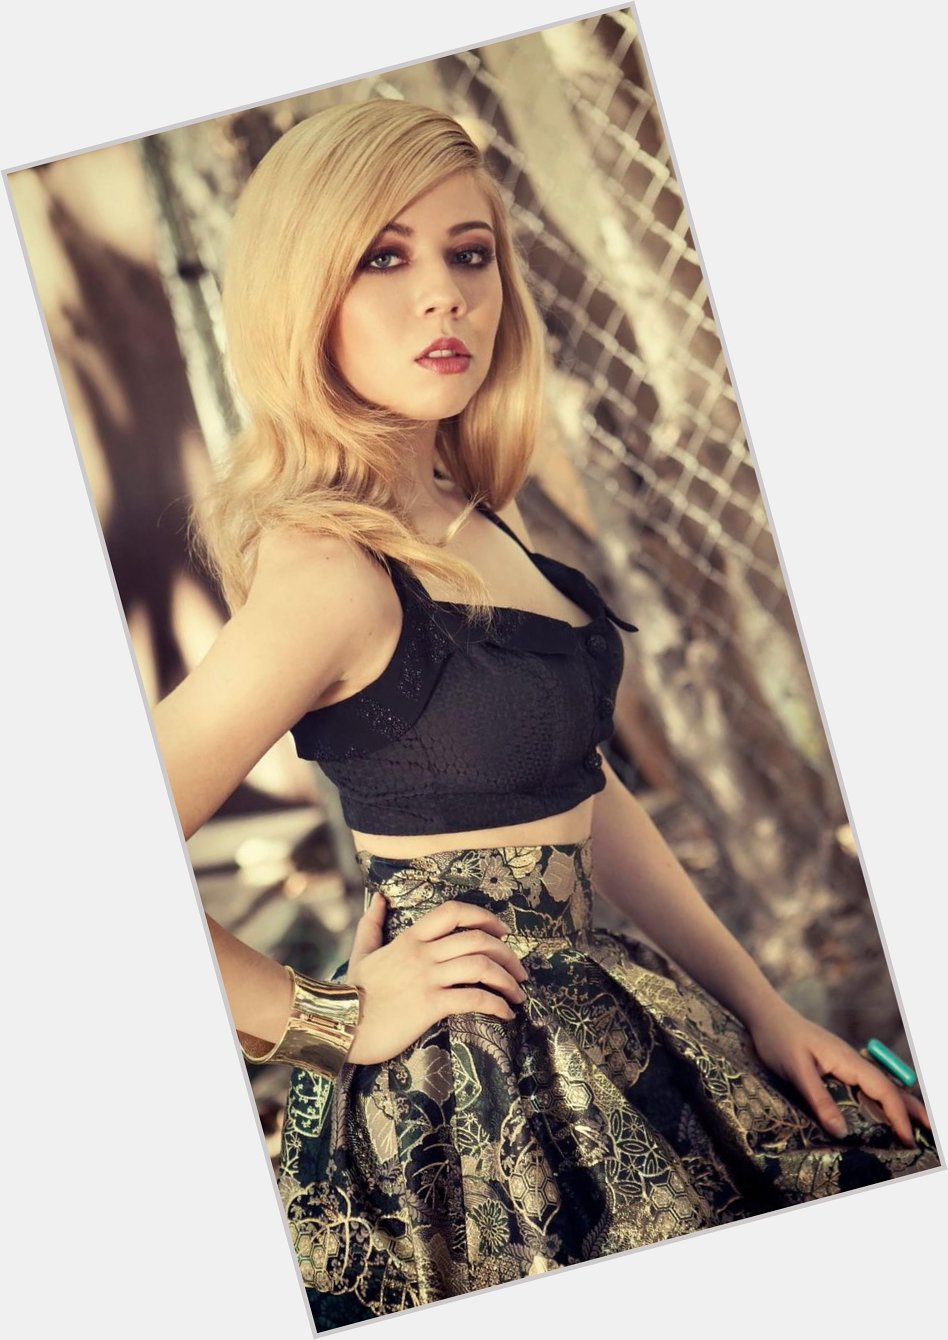 Happy 28th Birthday to Jennette McCurdy  from Nickelodeon Sam & Cat. 